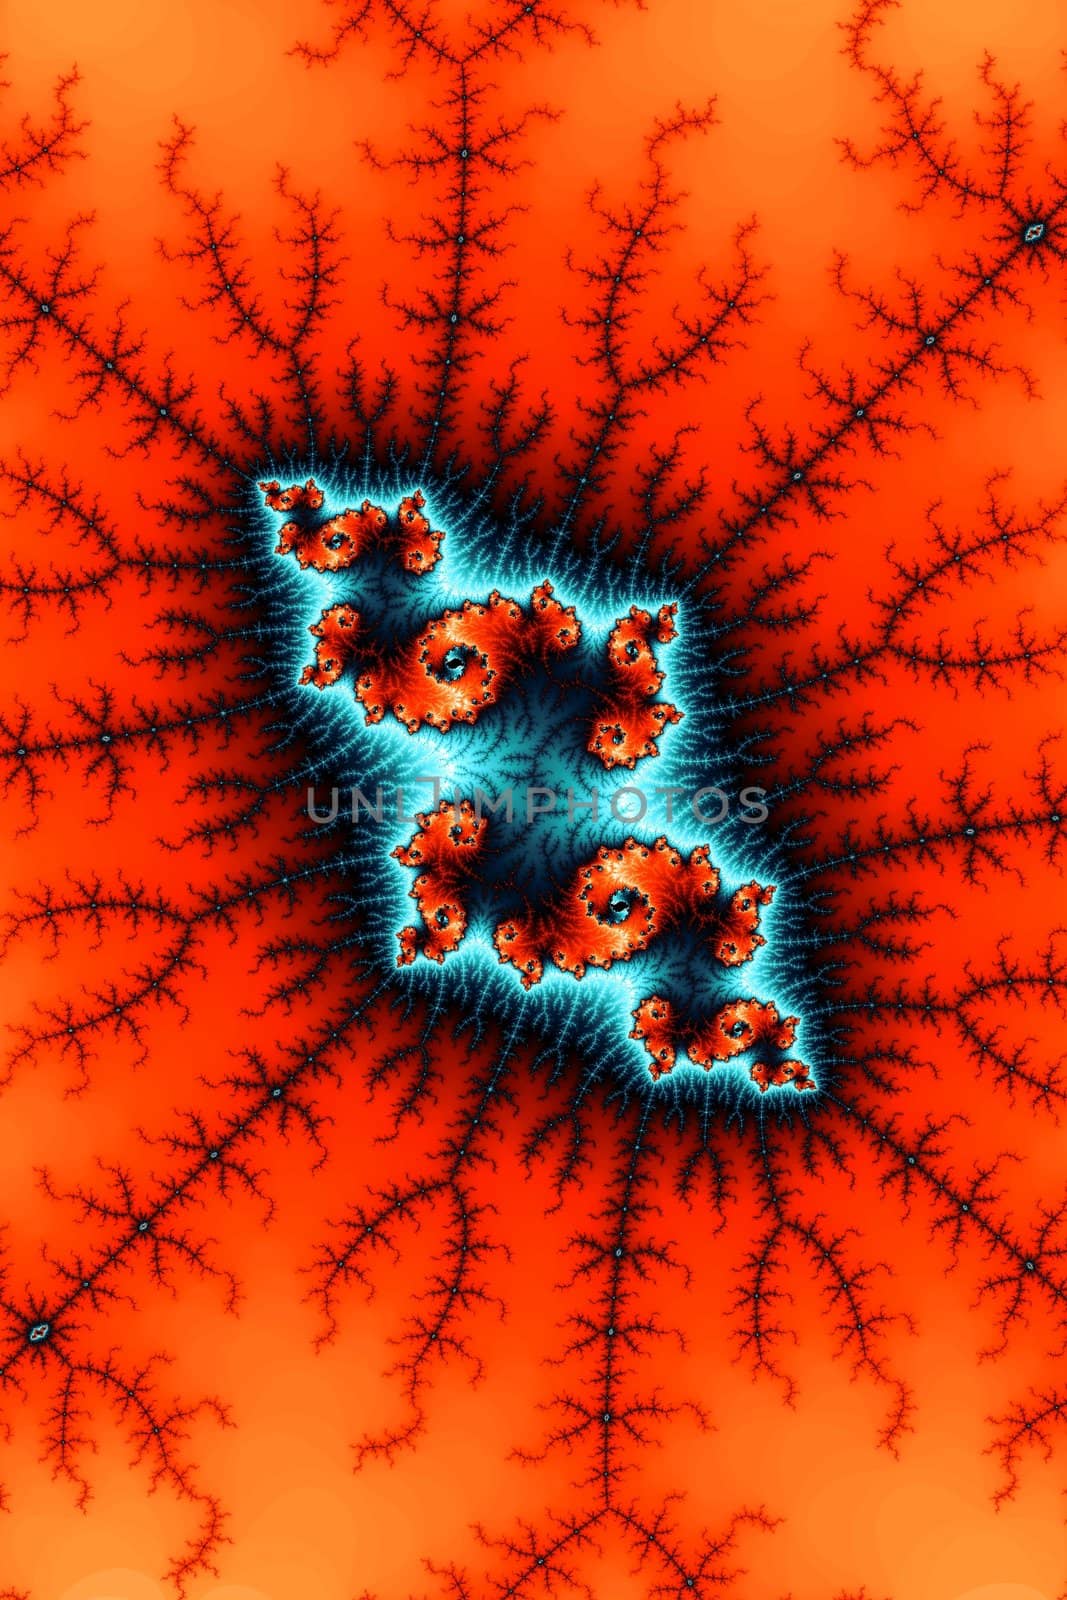 An image of a typical fractal graphic